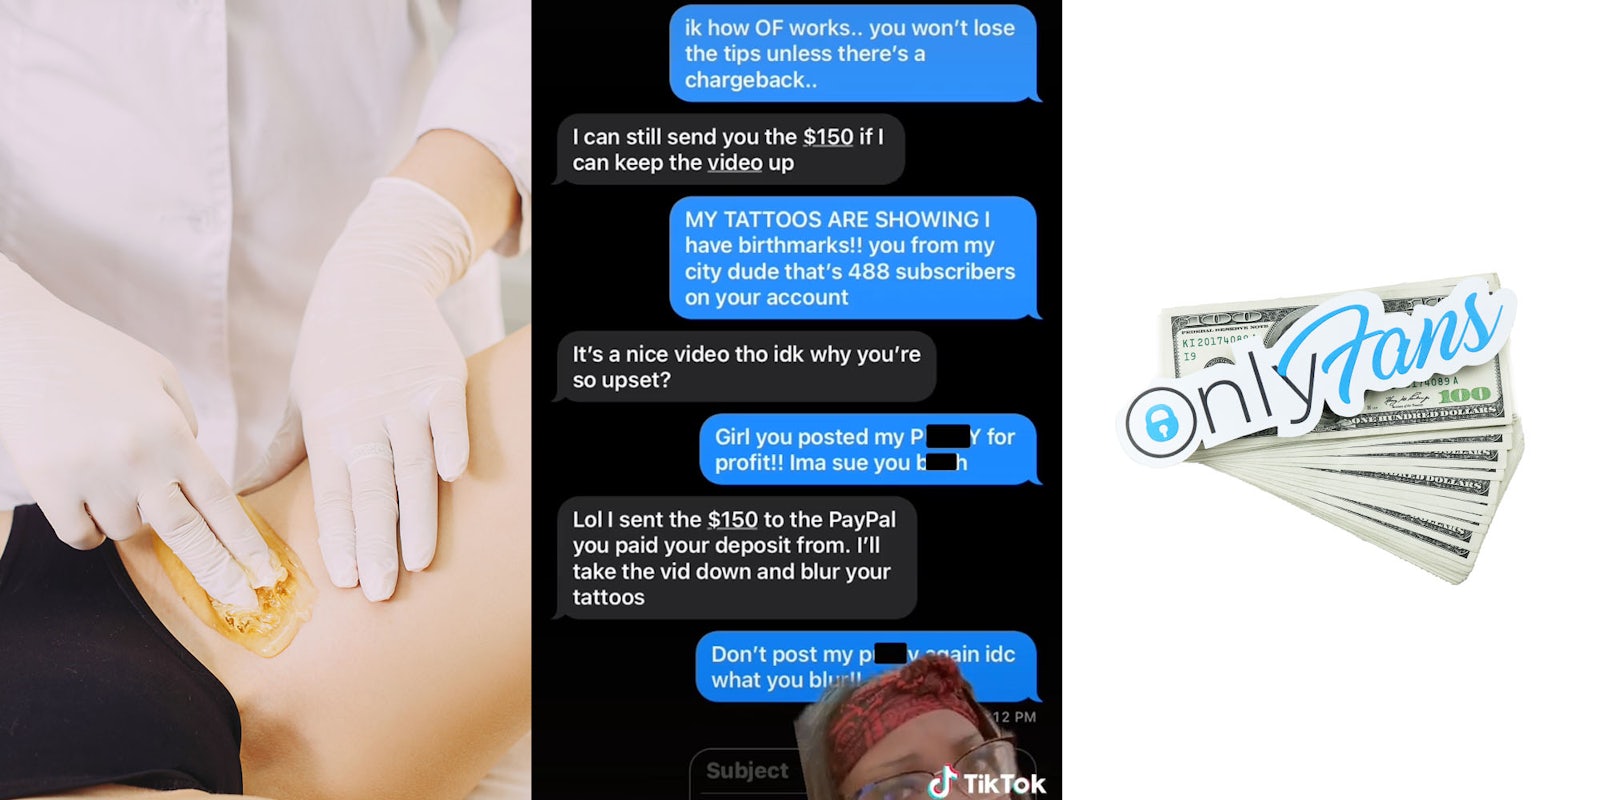 Woman getting bikini line waxed (l) greenscreen tiktok text messages between woman and waxer 'I know how OF works... you wont lose the tips unless there's a chargeback... It's a nice video tho idk why you're so upset? Girl you posted my pussy for profit! Ima sue you bitch Lol I sent the 4150 to the PayPal you paid your deposit from. I'll take the vid down and blur your tattoos Don't post my pussy again idc what you blur!' (c) OnlyFans sticker on pile of money on white background (r)